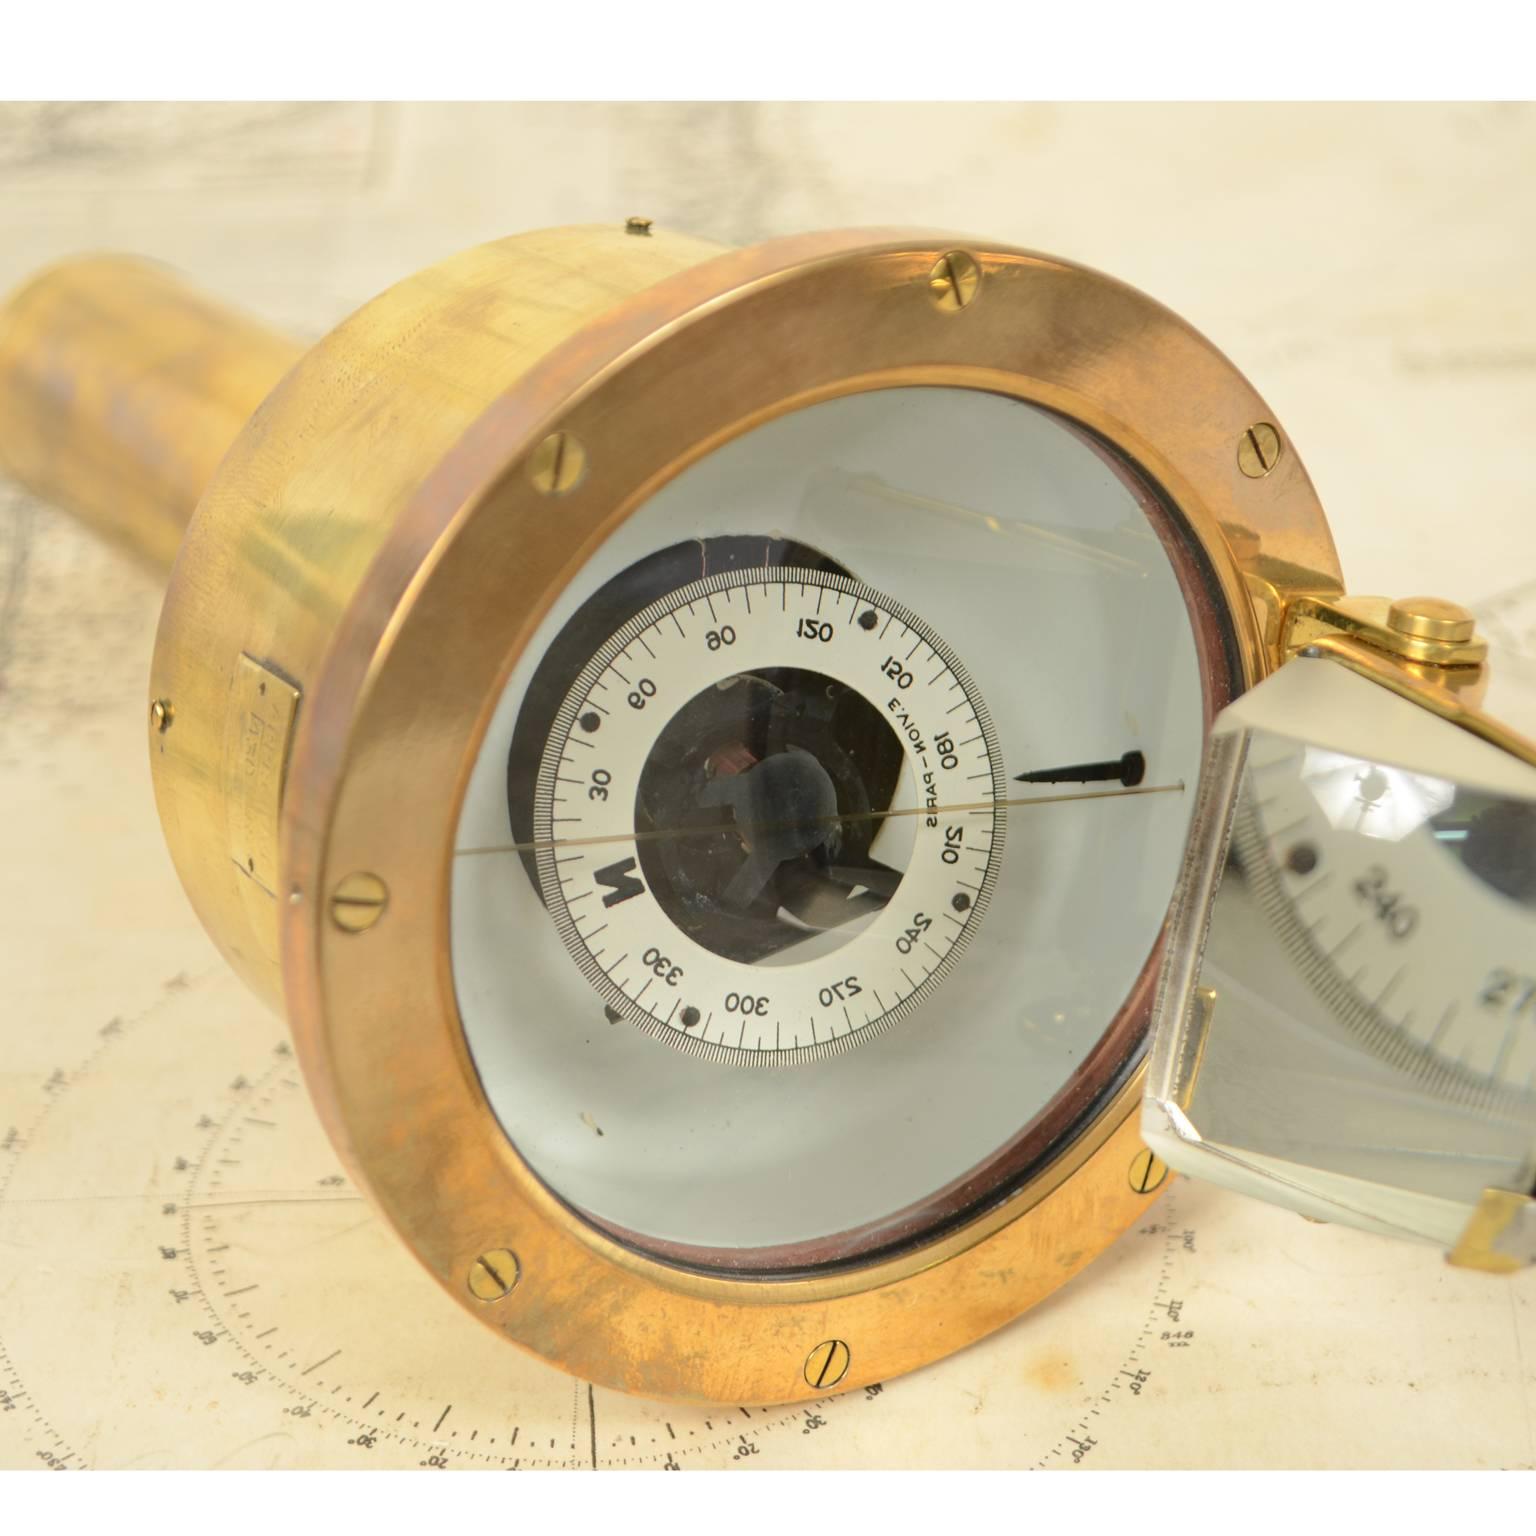 Nautical Brass Magnetic Compass with Original Box by E. Vion Paris, Early 1900 For Sale 11